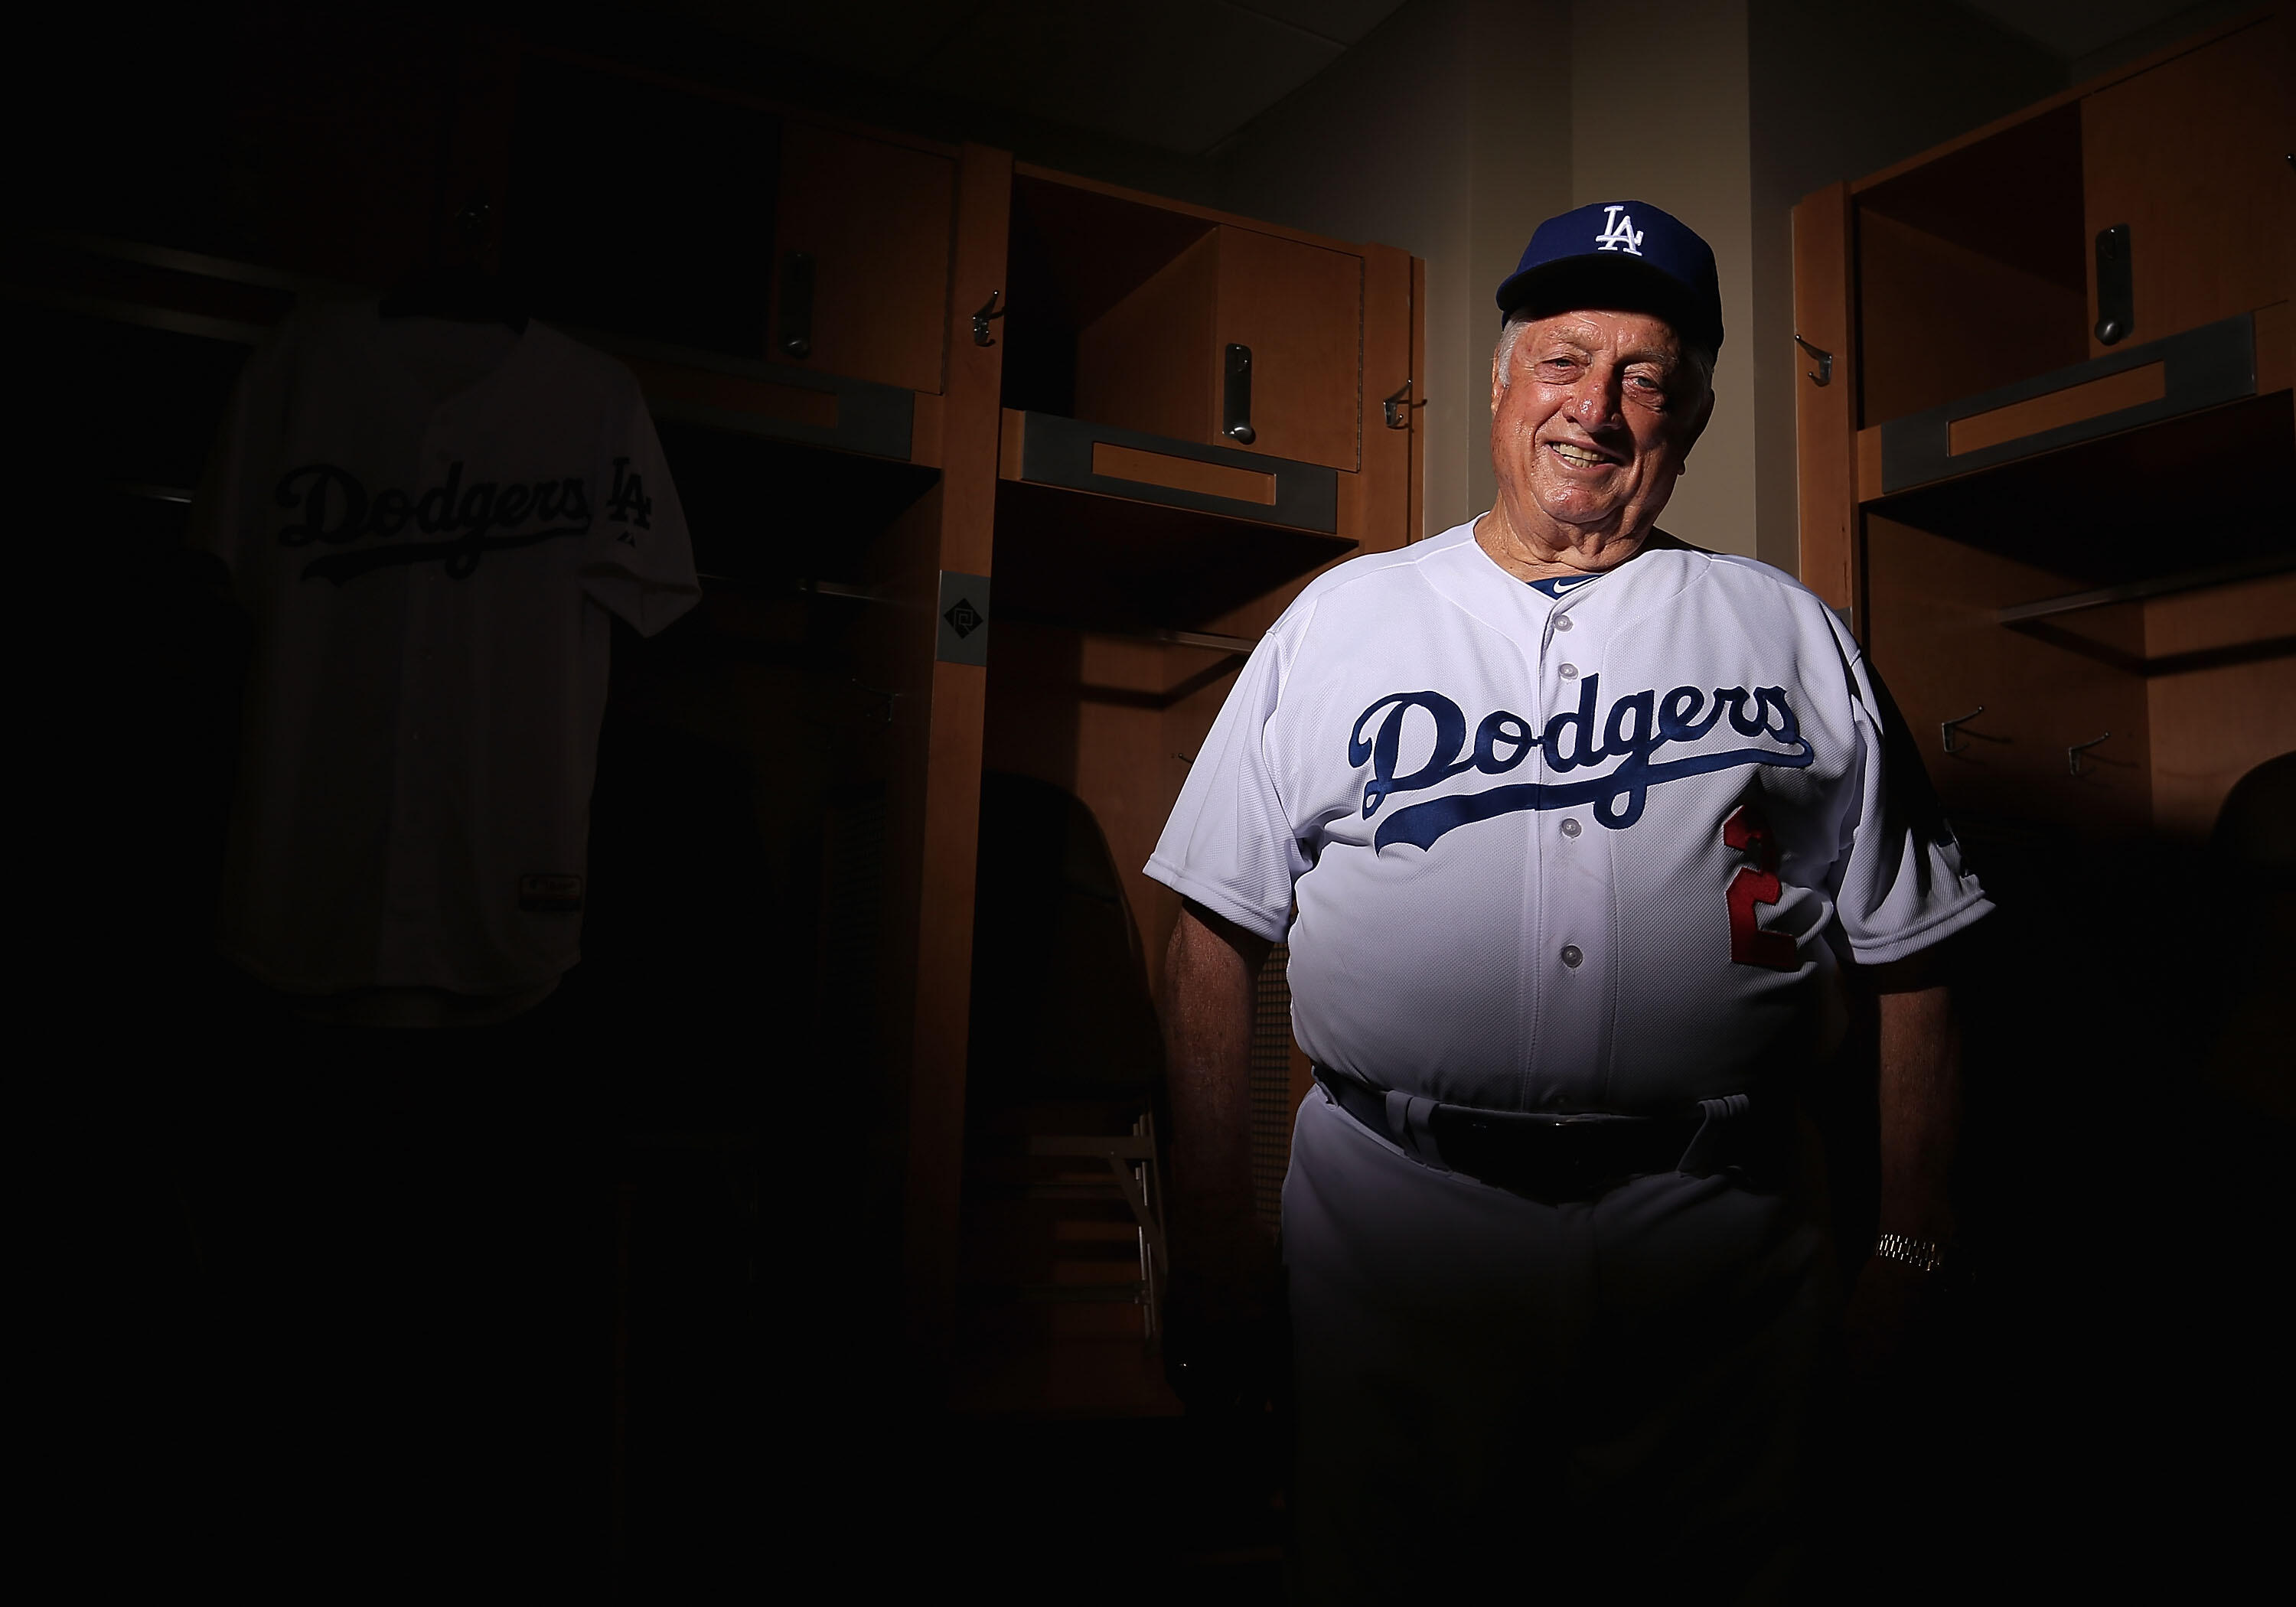 GLENDALE, AZ - FEBRUARY 20:  Tommy Lasorda of the Los Angeles Dodgers poses for a portrait during spring training photo day at Camelback Ranch on February 20, 2014 in Glendale, Arizona.  (Photo by Christian Petersen/Getty Images)